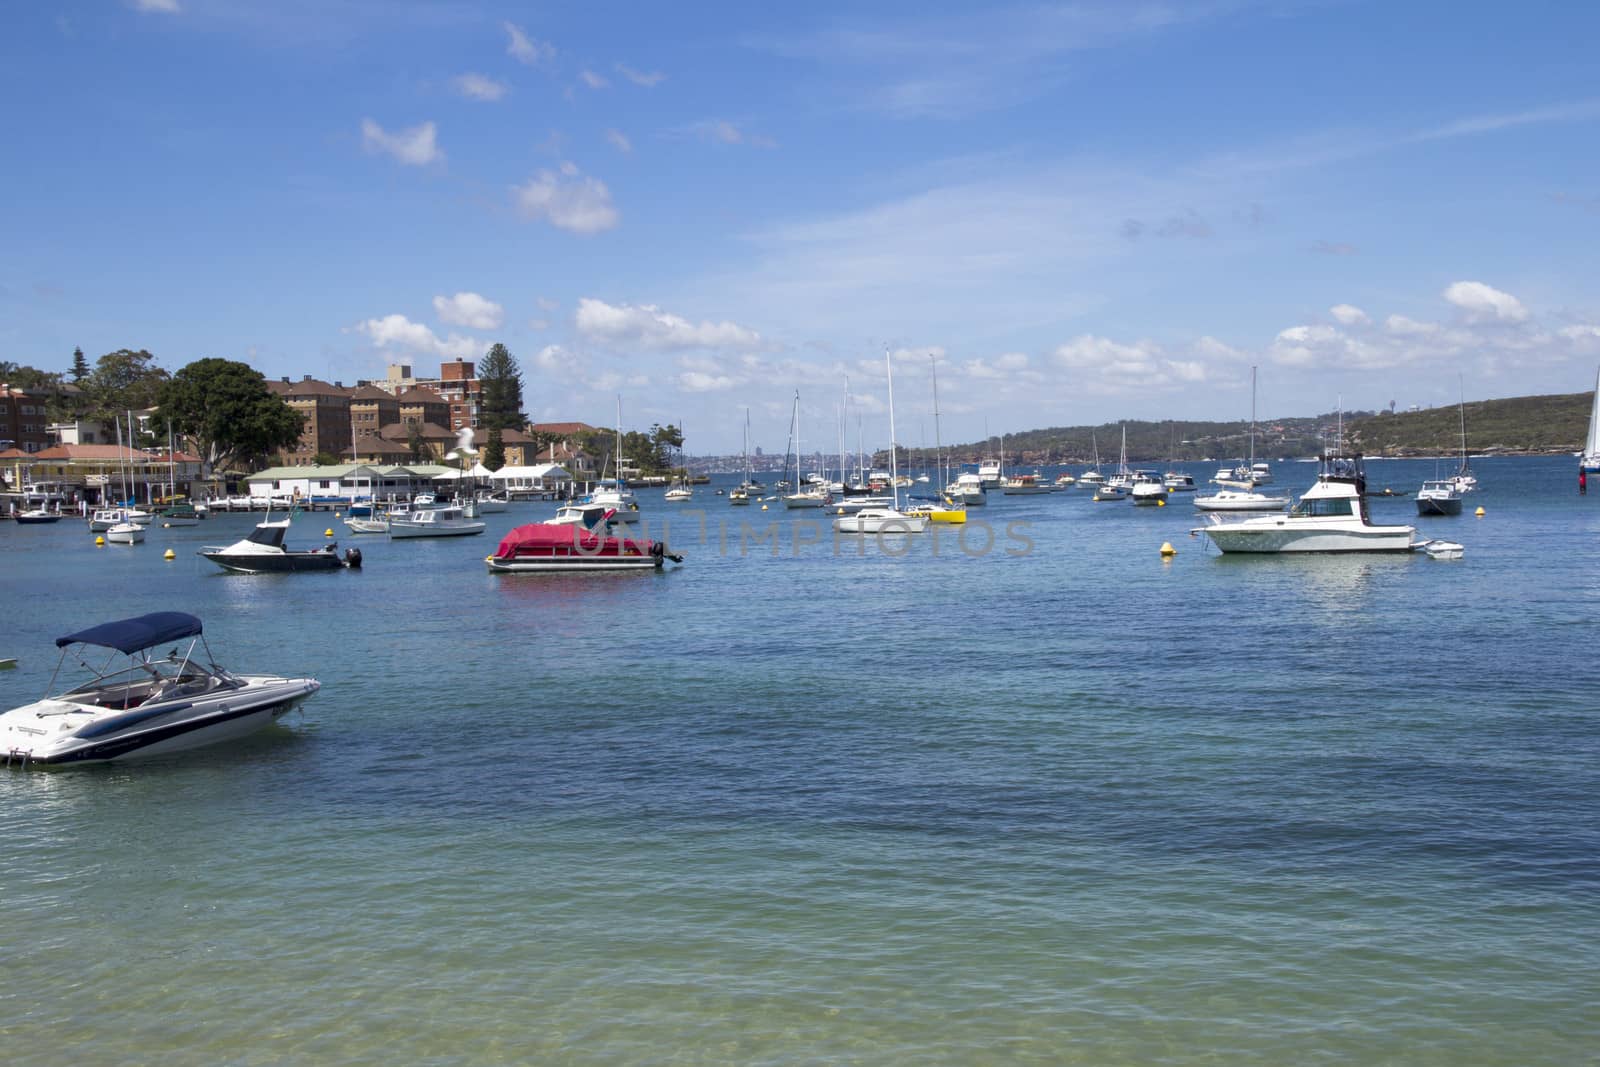 MANLY, AUSTALIA-DECEMBER 08 2013: Boats moored in Manly Cove. Manly is 11 miles north east of Sydney Central Business District in the Northern Beaches region.